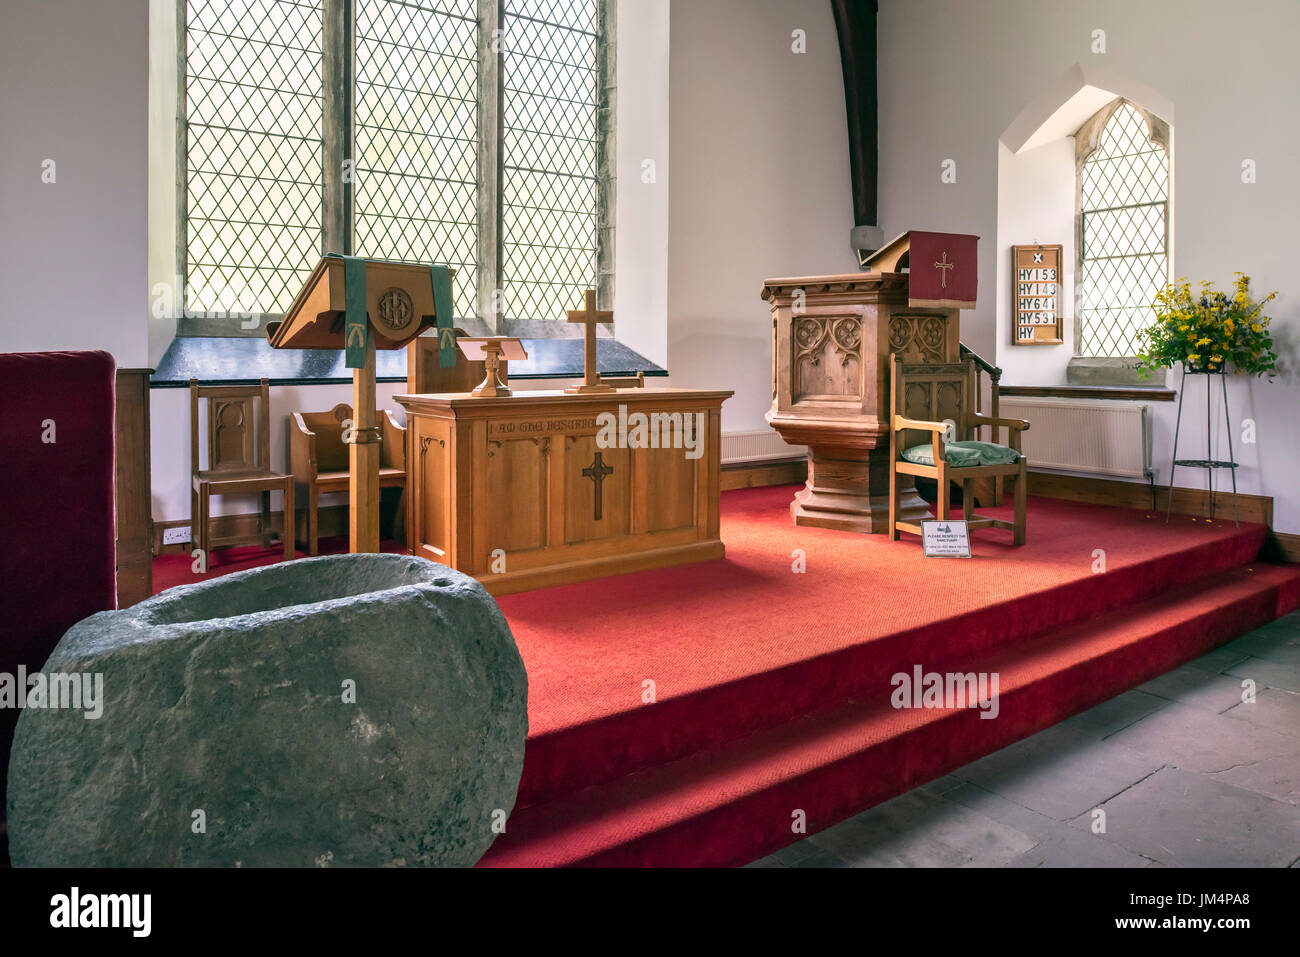 Interior showing stone baptismal font, altar and wooden pulpit of the Balquhidder Parish Church, Stirling, Scotland, UK Stock Photo